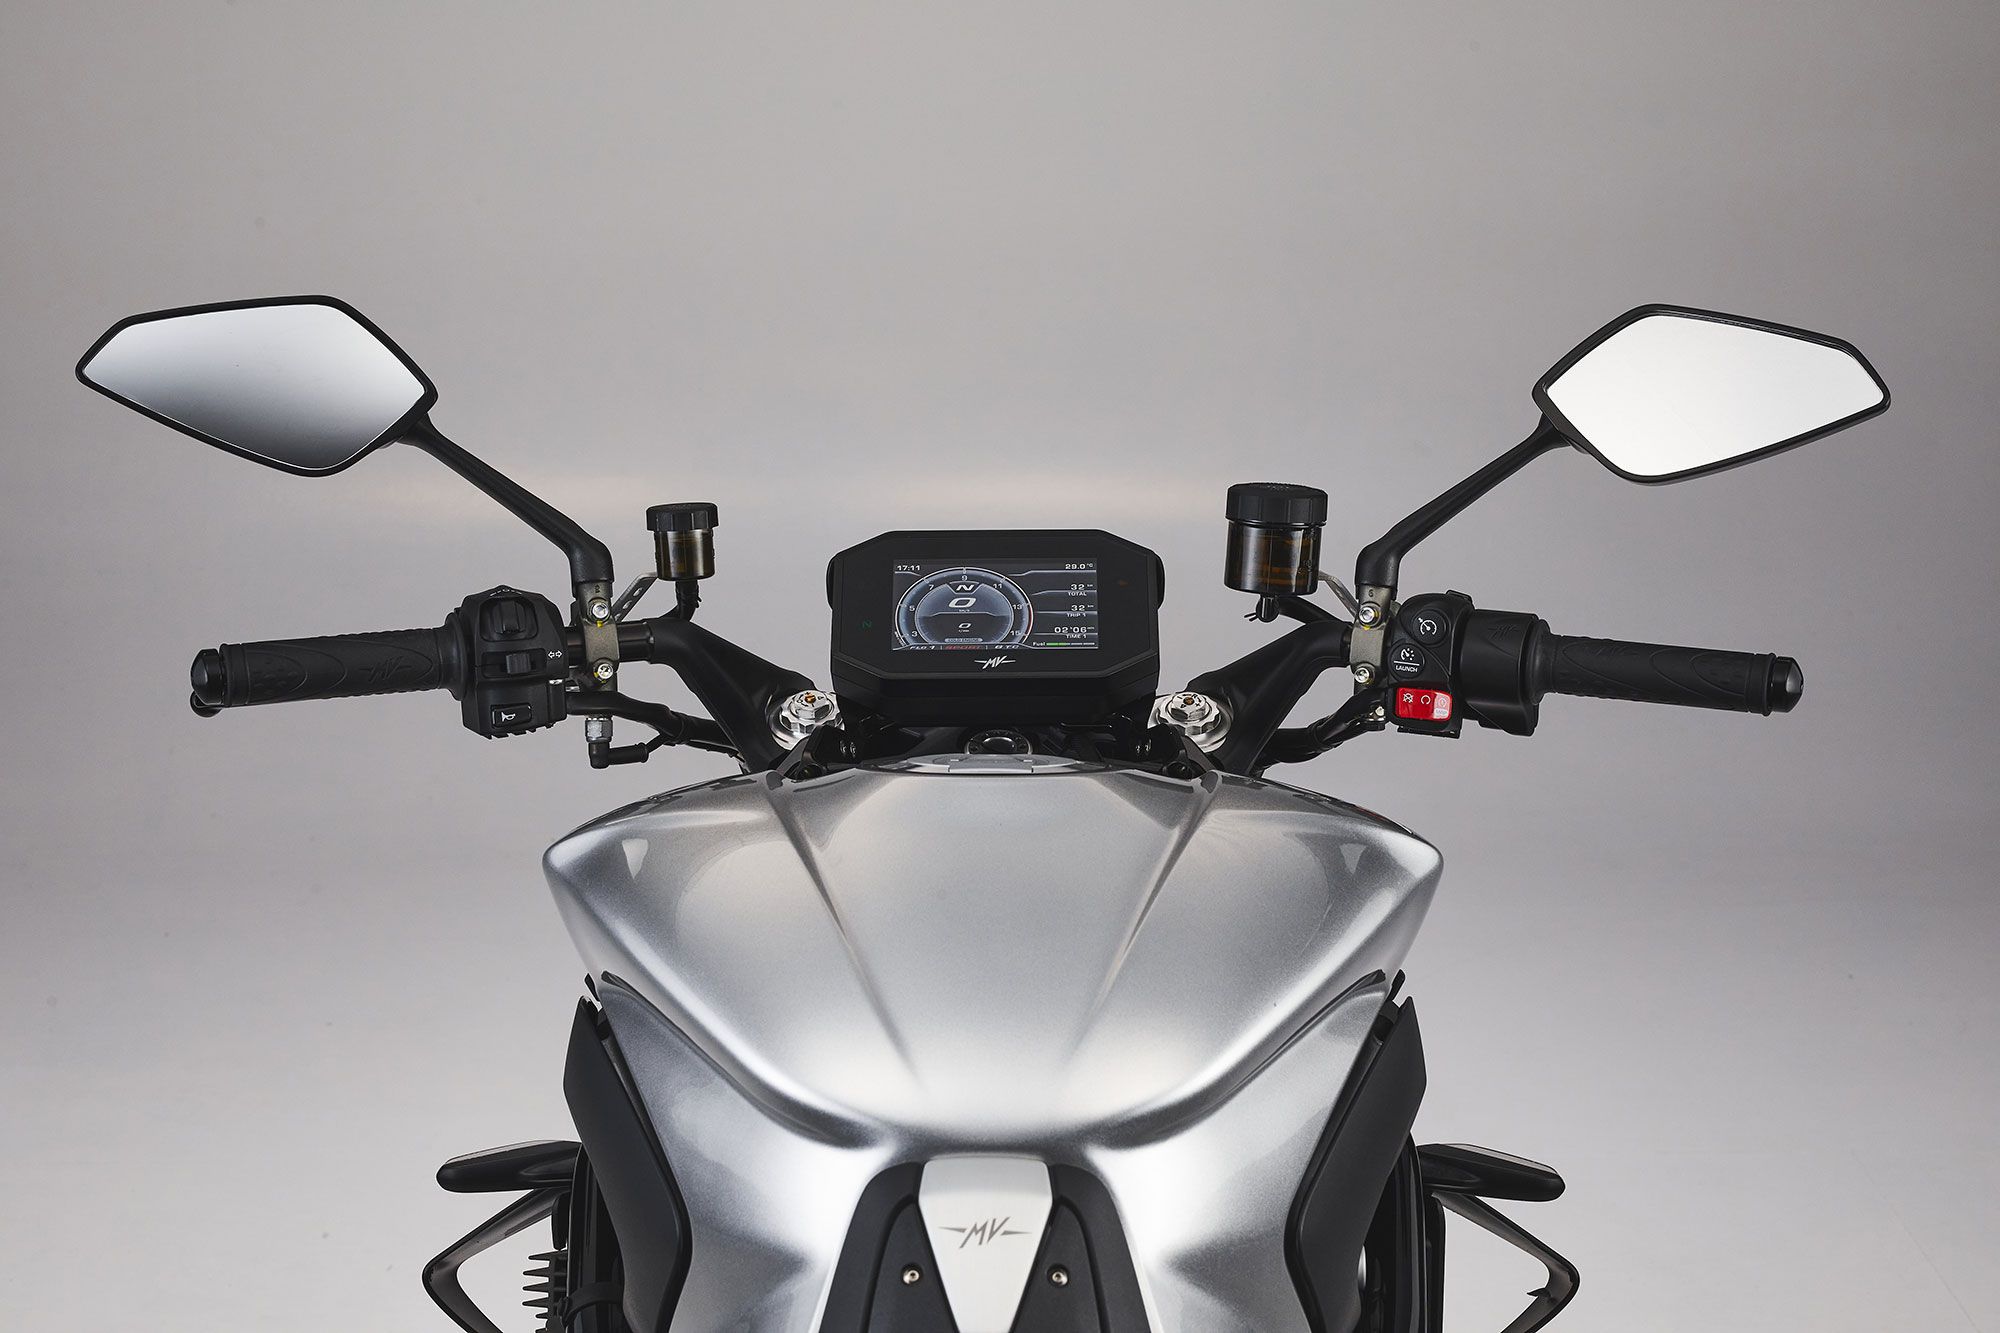 The RS gets new clip-on-style handlebars to provide a more comfortable ride position.